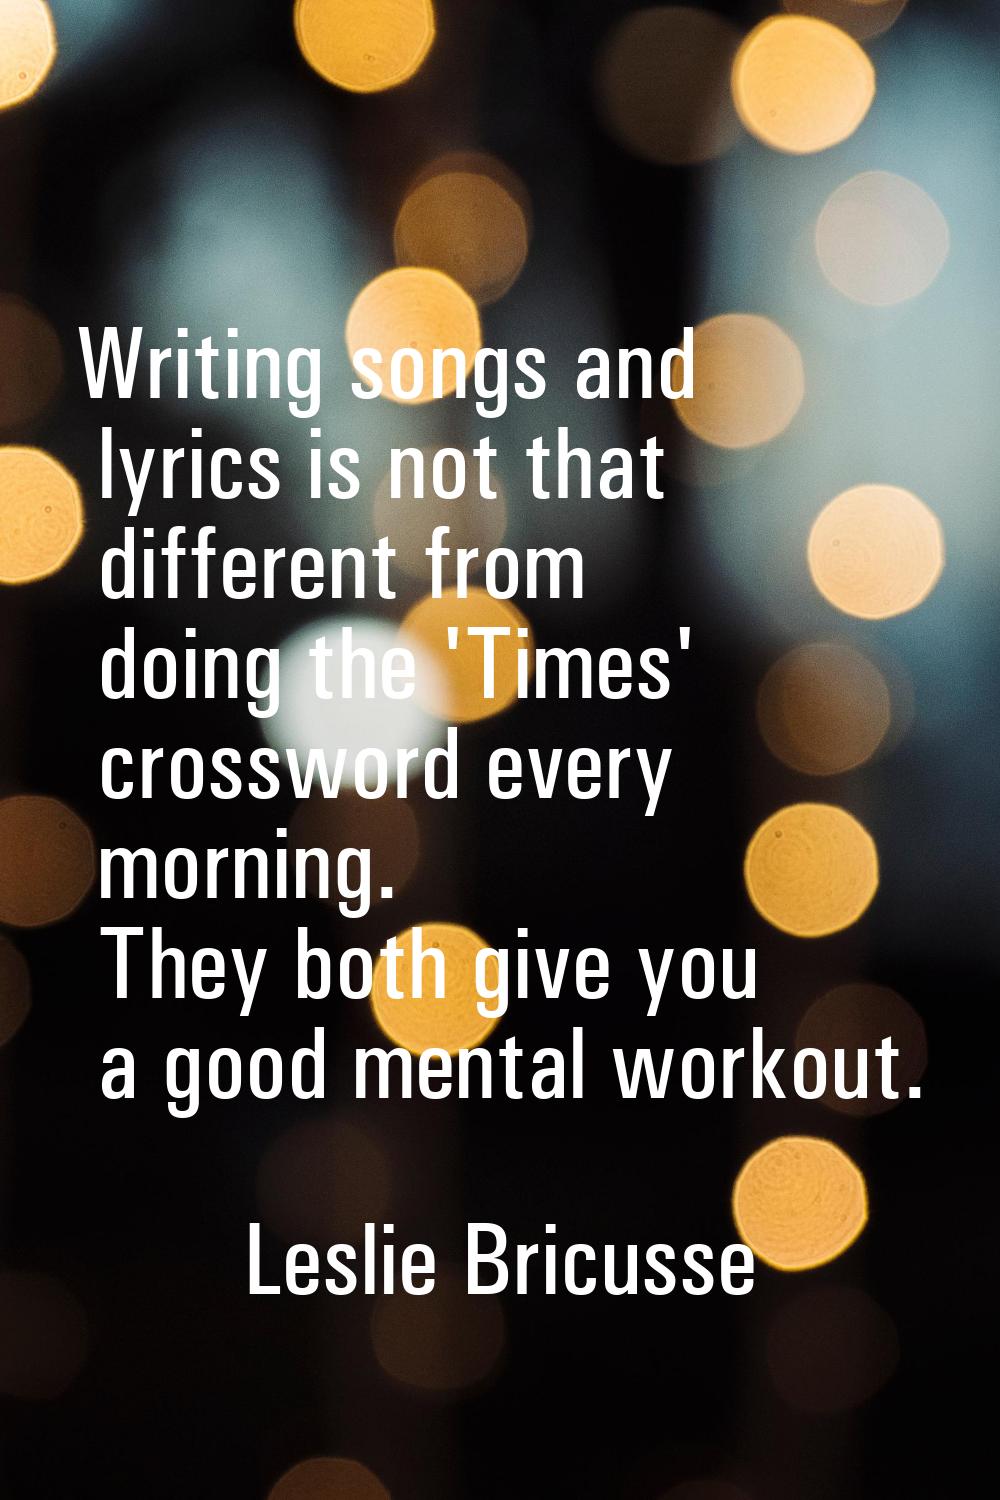 Writing songs and lyrics is not that different from doing the 'Times' crossword every morning. They